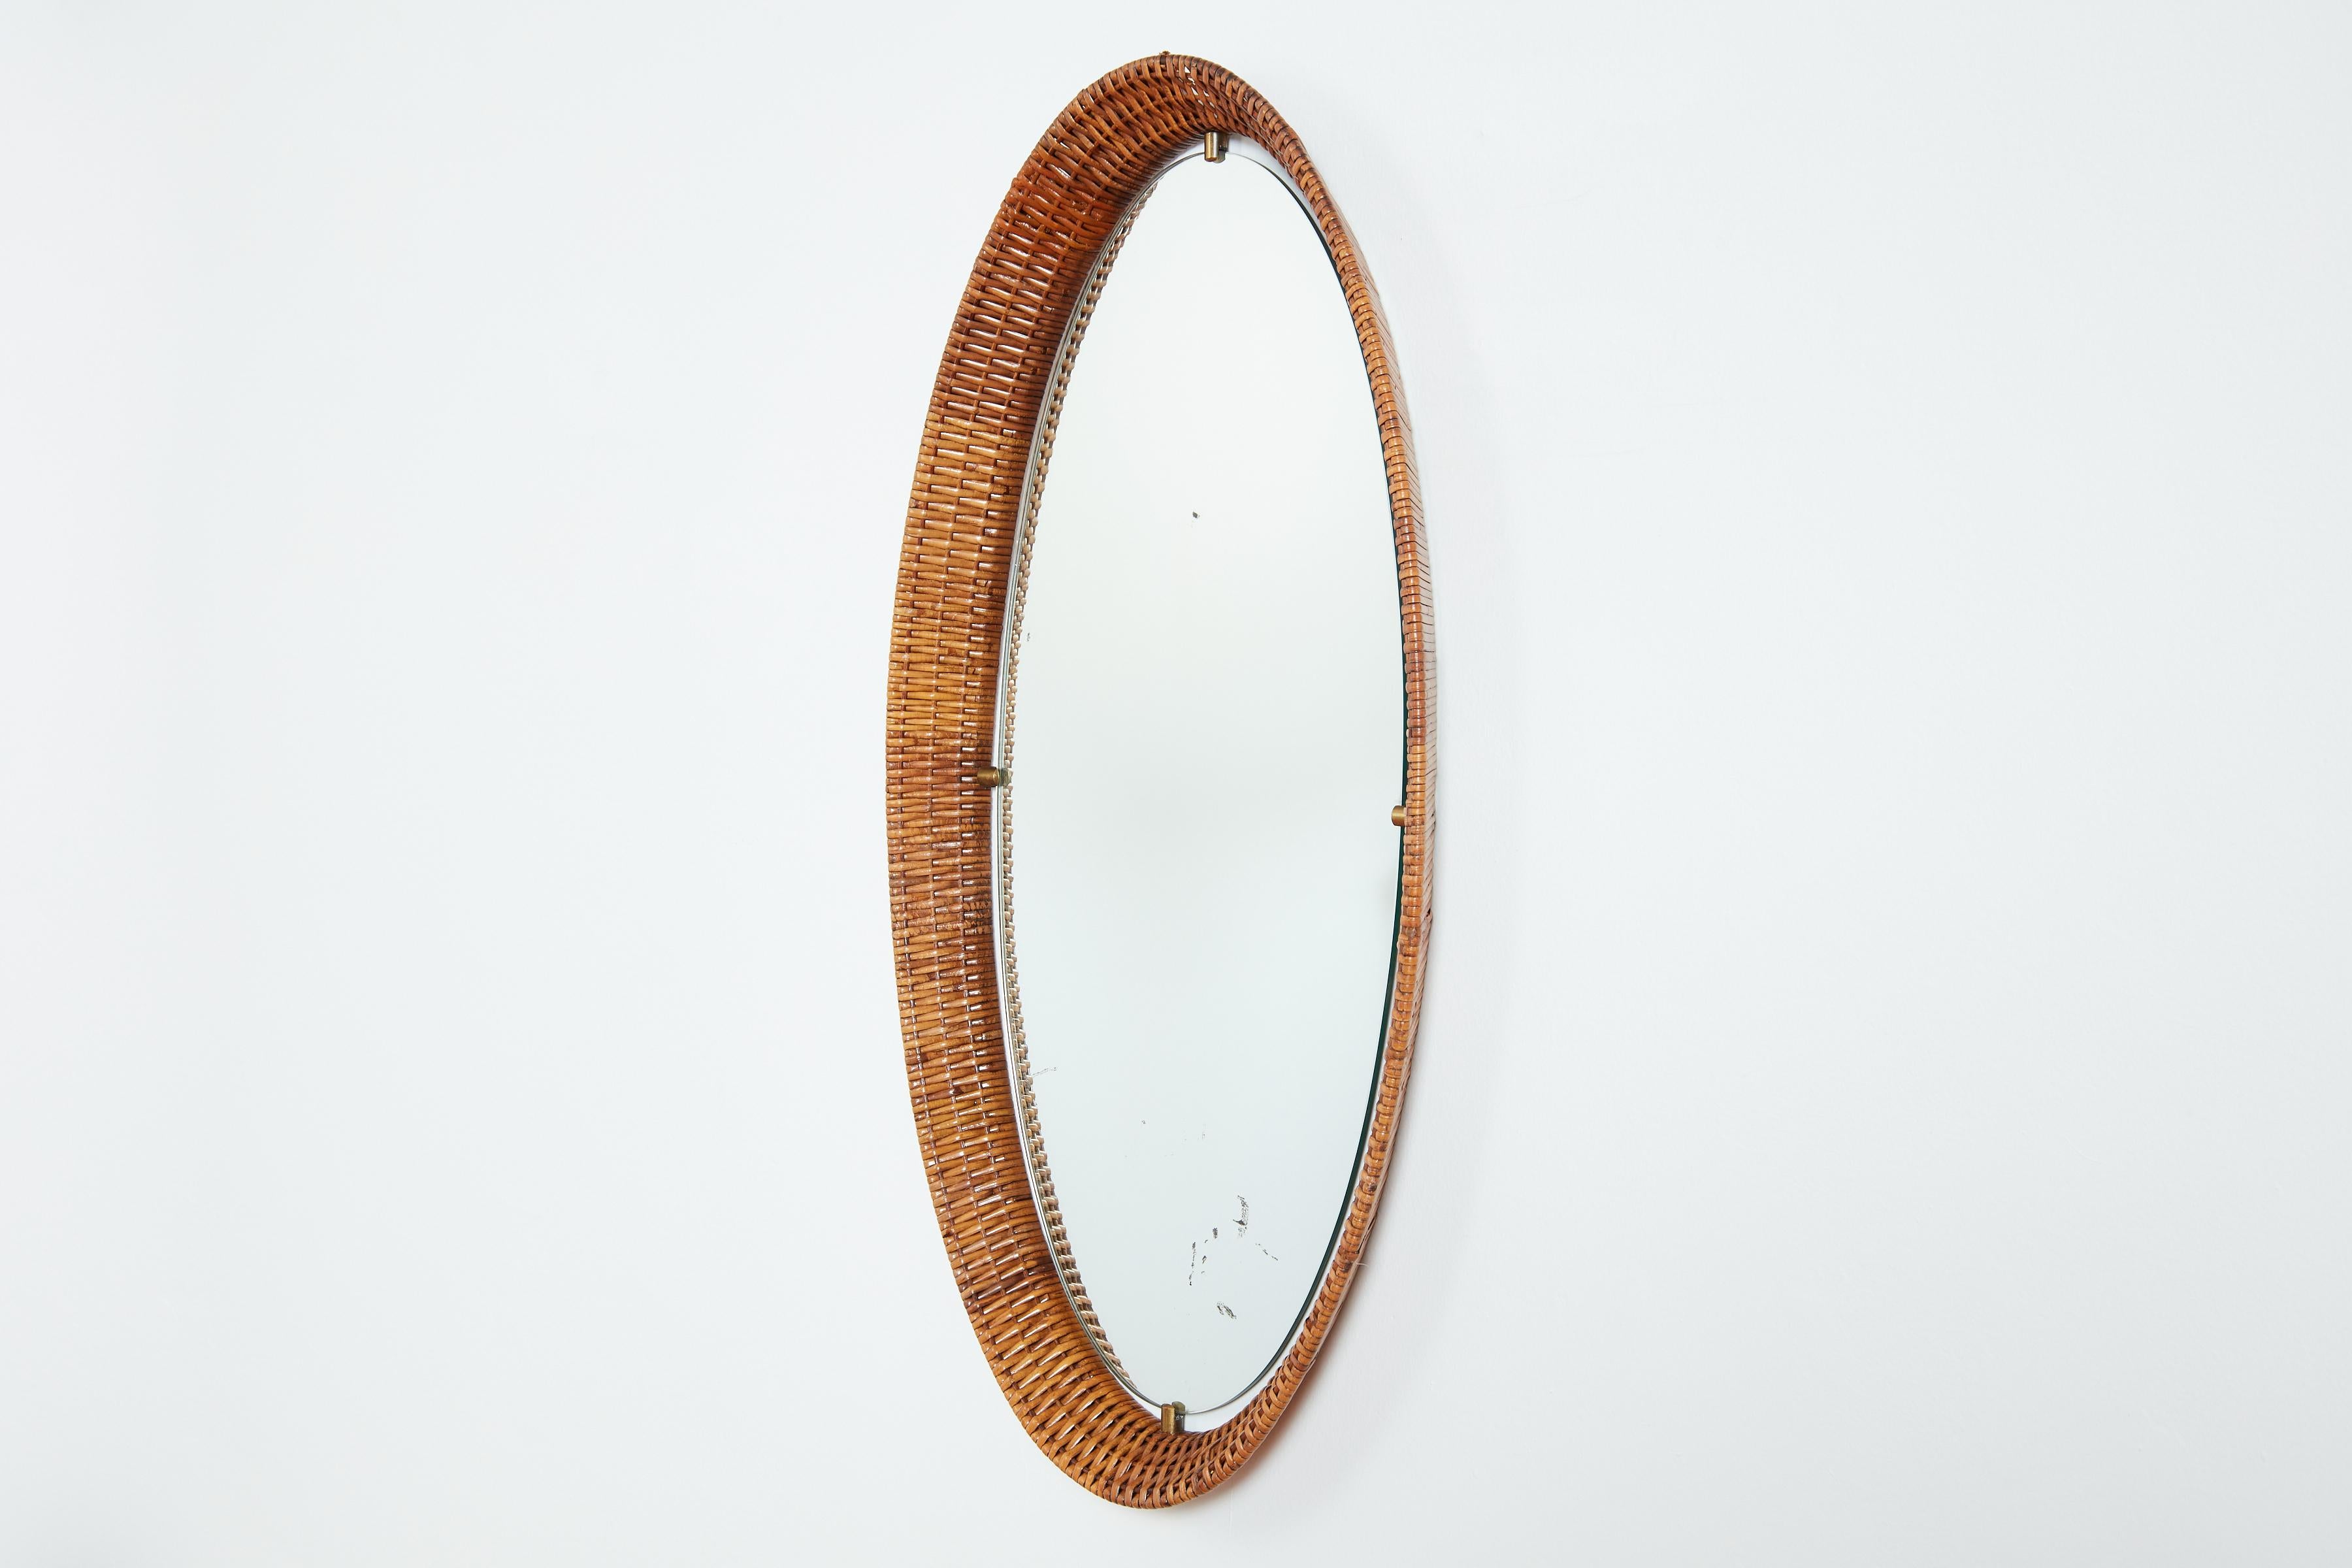 Italian woven wicker mirror in oval shape 
Brass clasp hardware with floating mirror 
Great patina to original mirror - which can be replaced with new mirror upon request.
Italy, 1950s